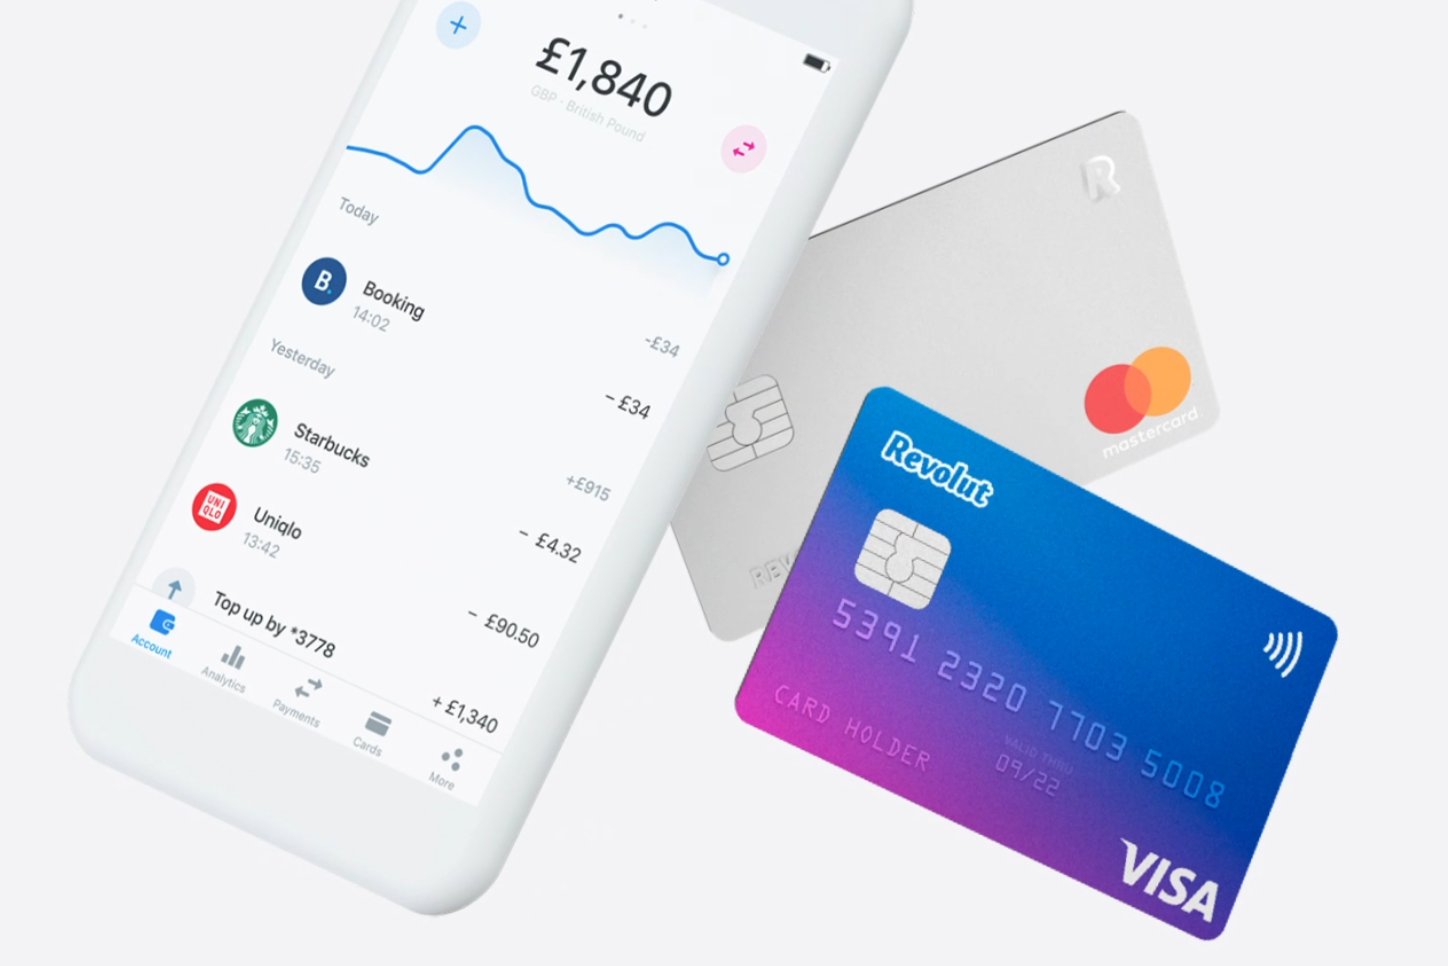 revolut_share_graphic.png